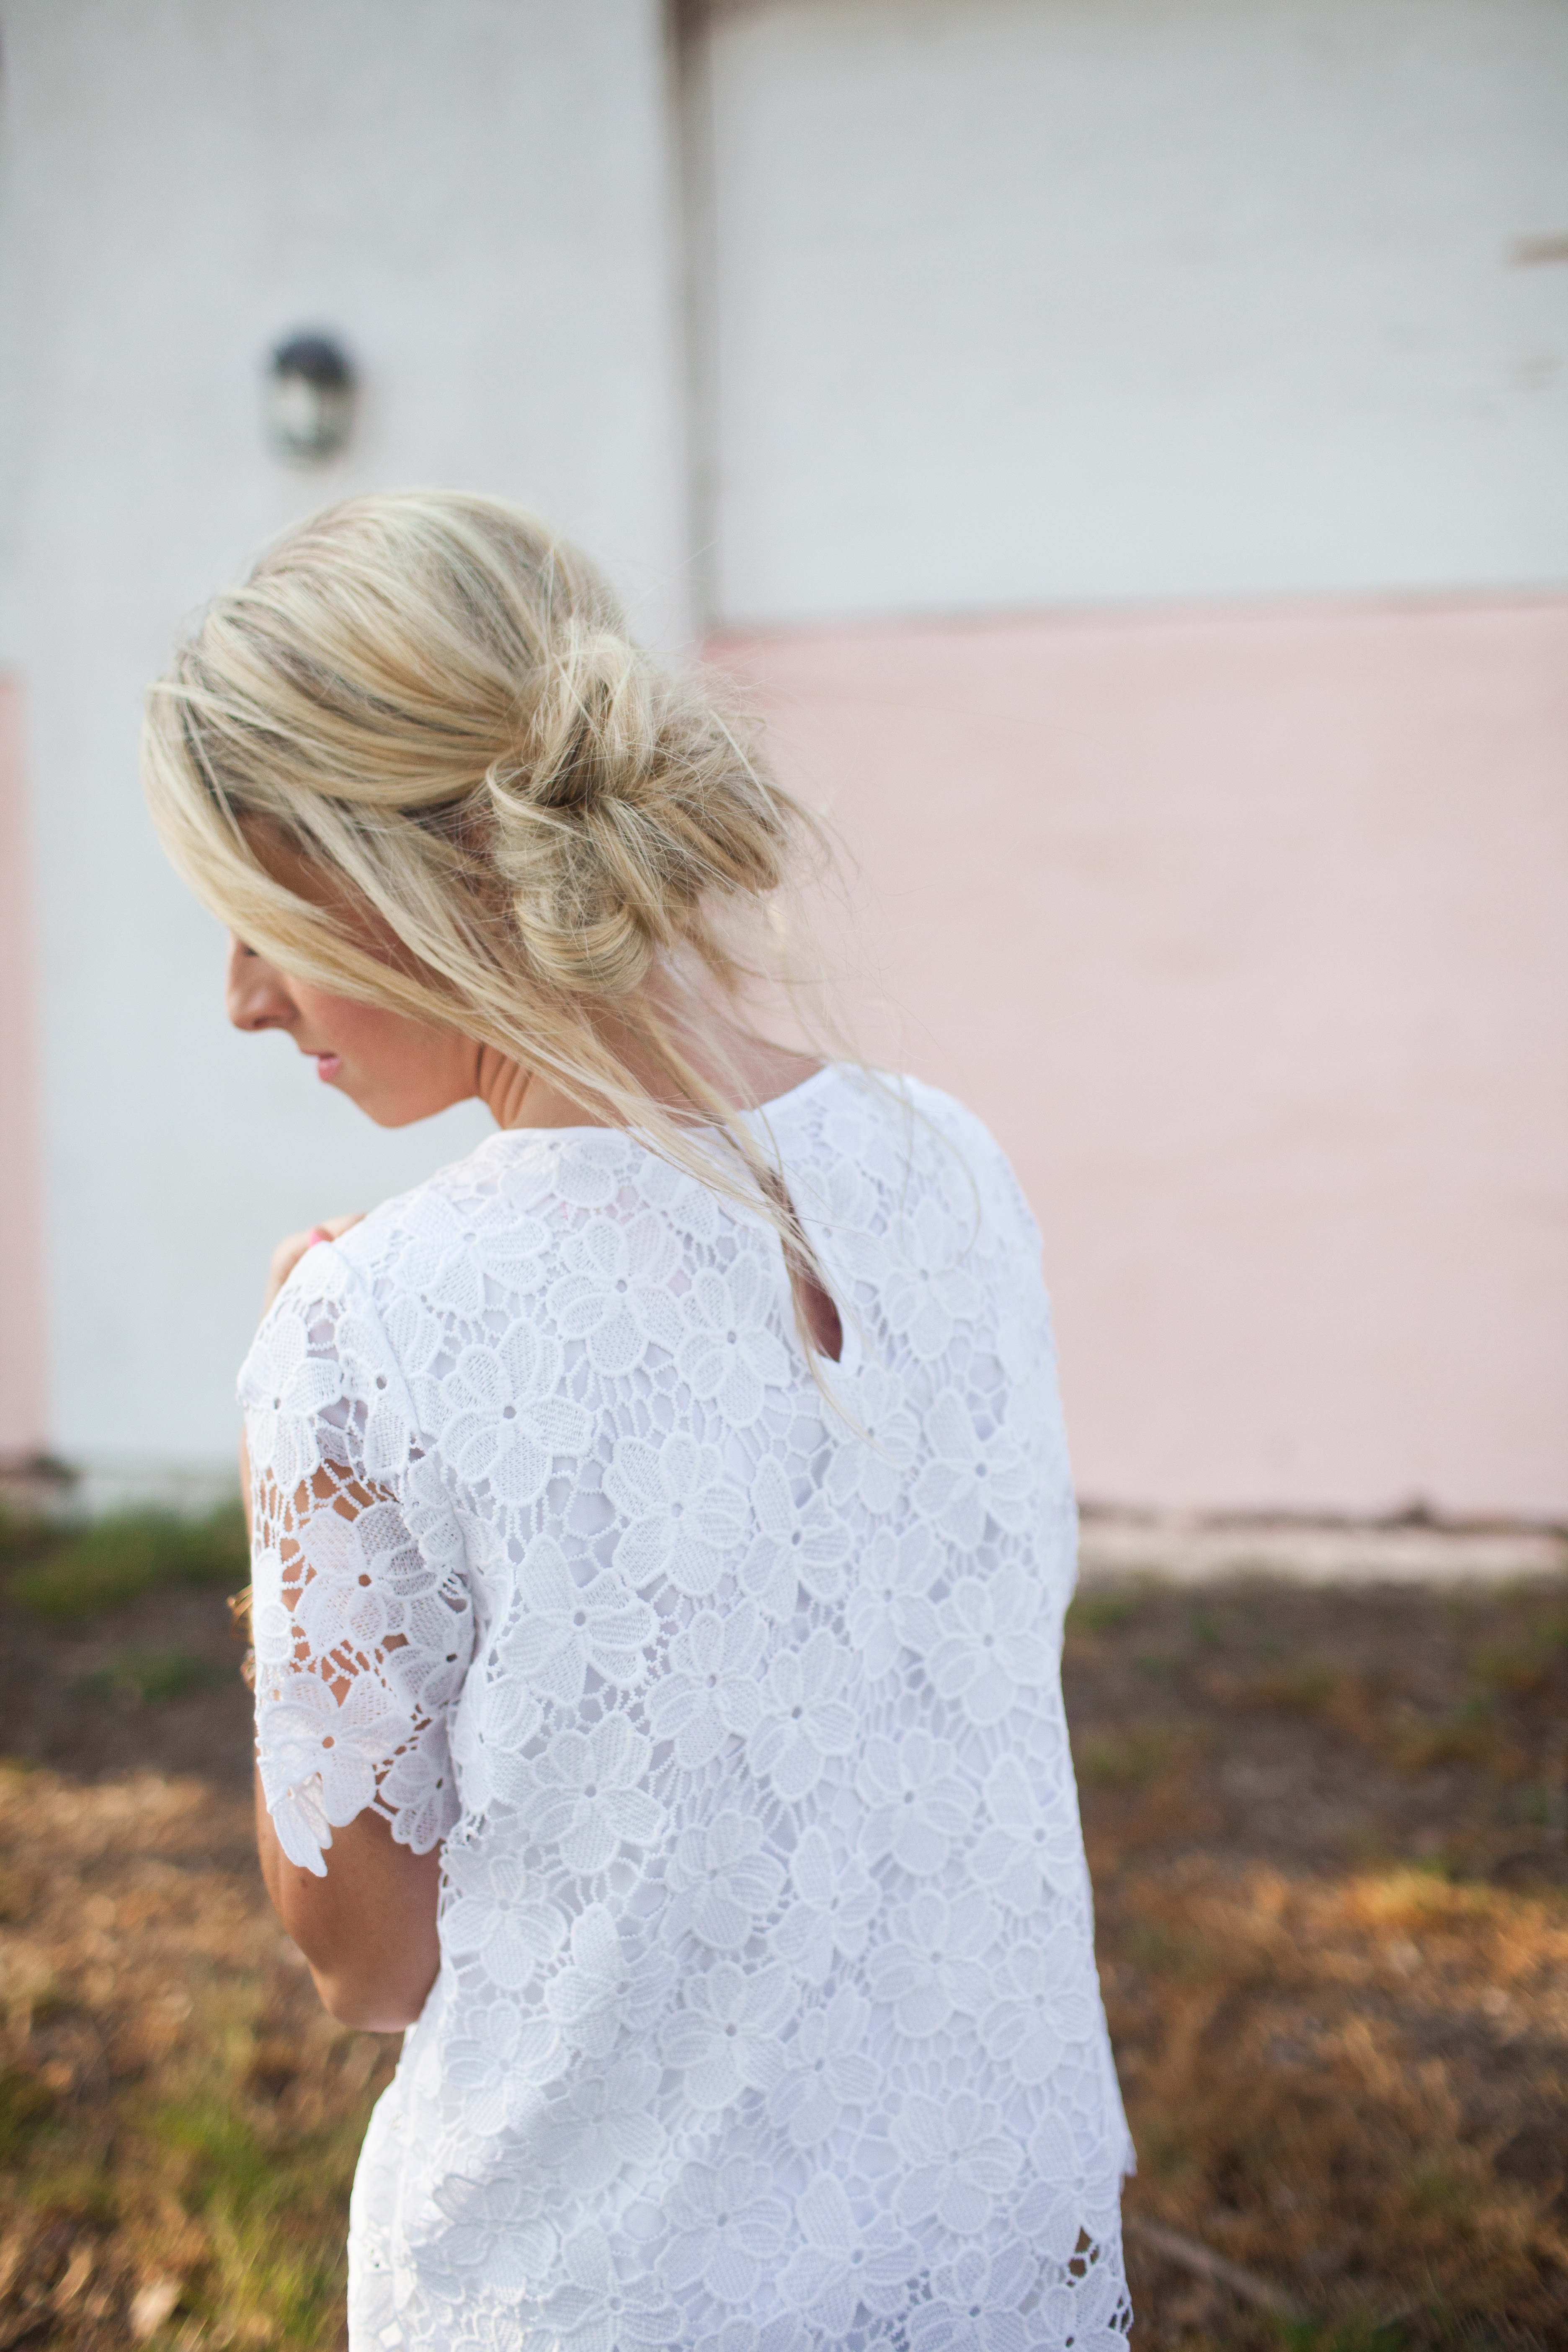 Kailee_Wright_nordstrom_eyelet top-5